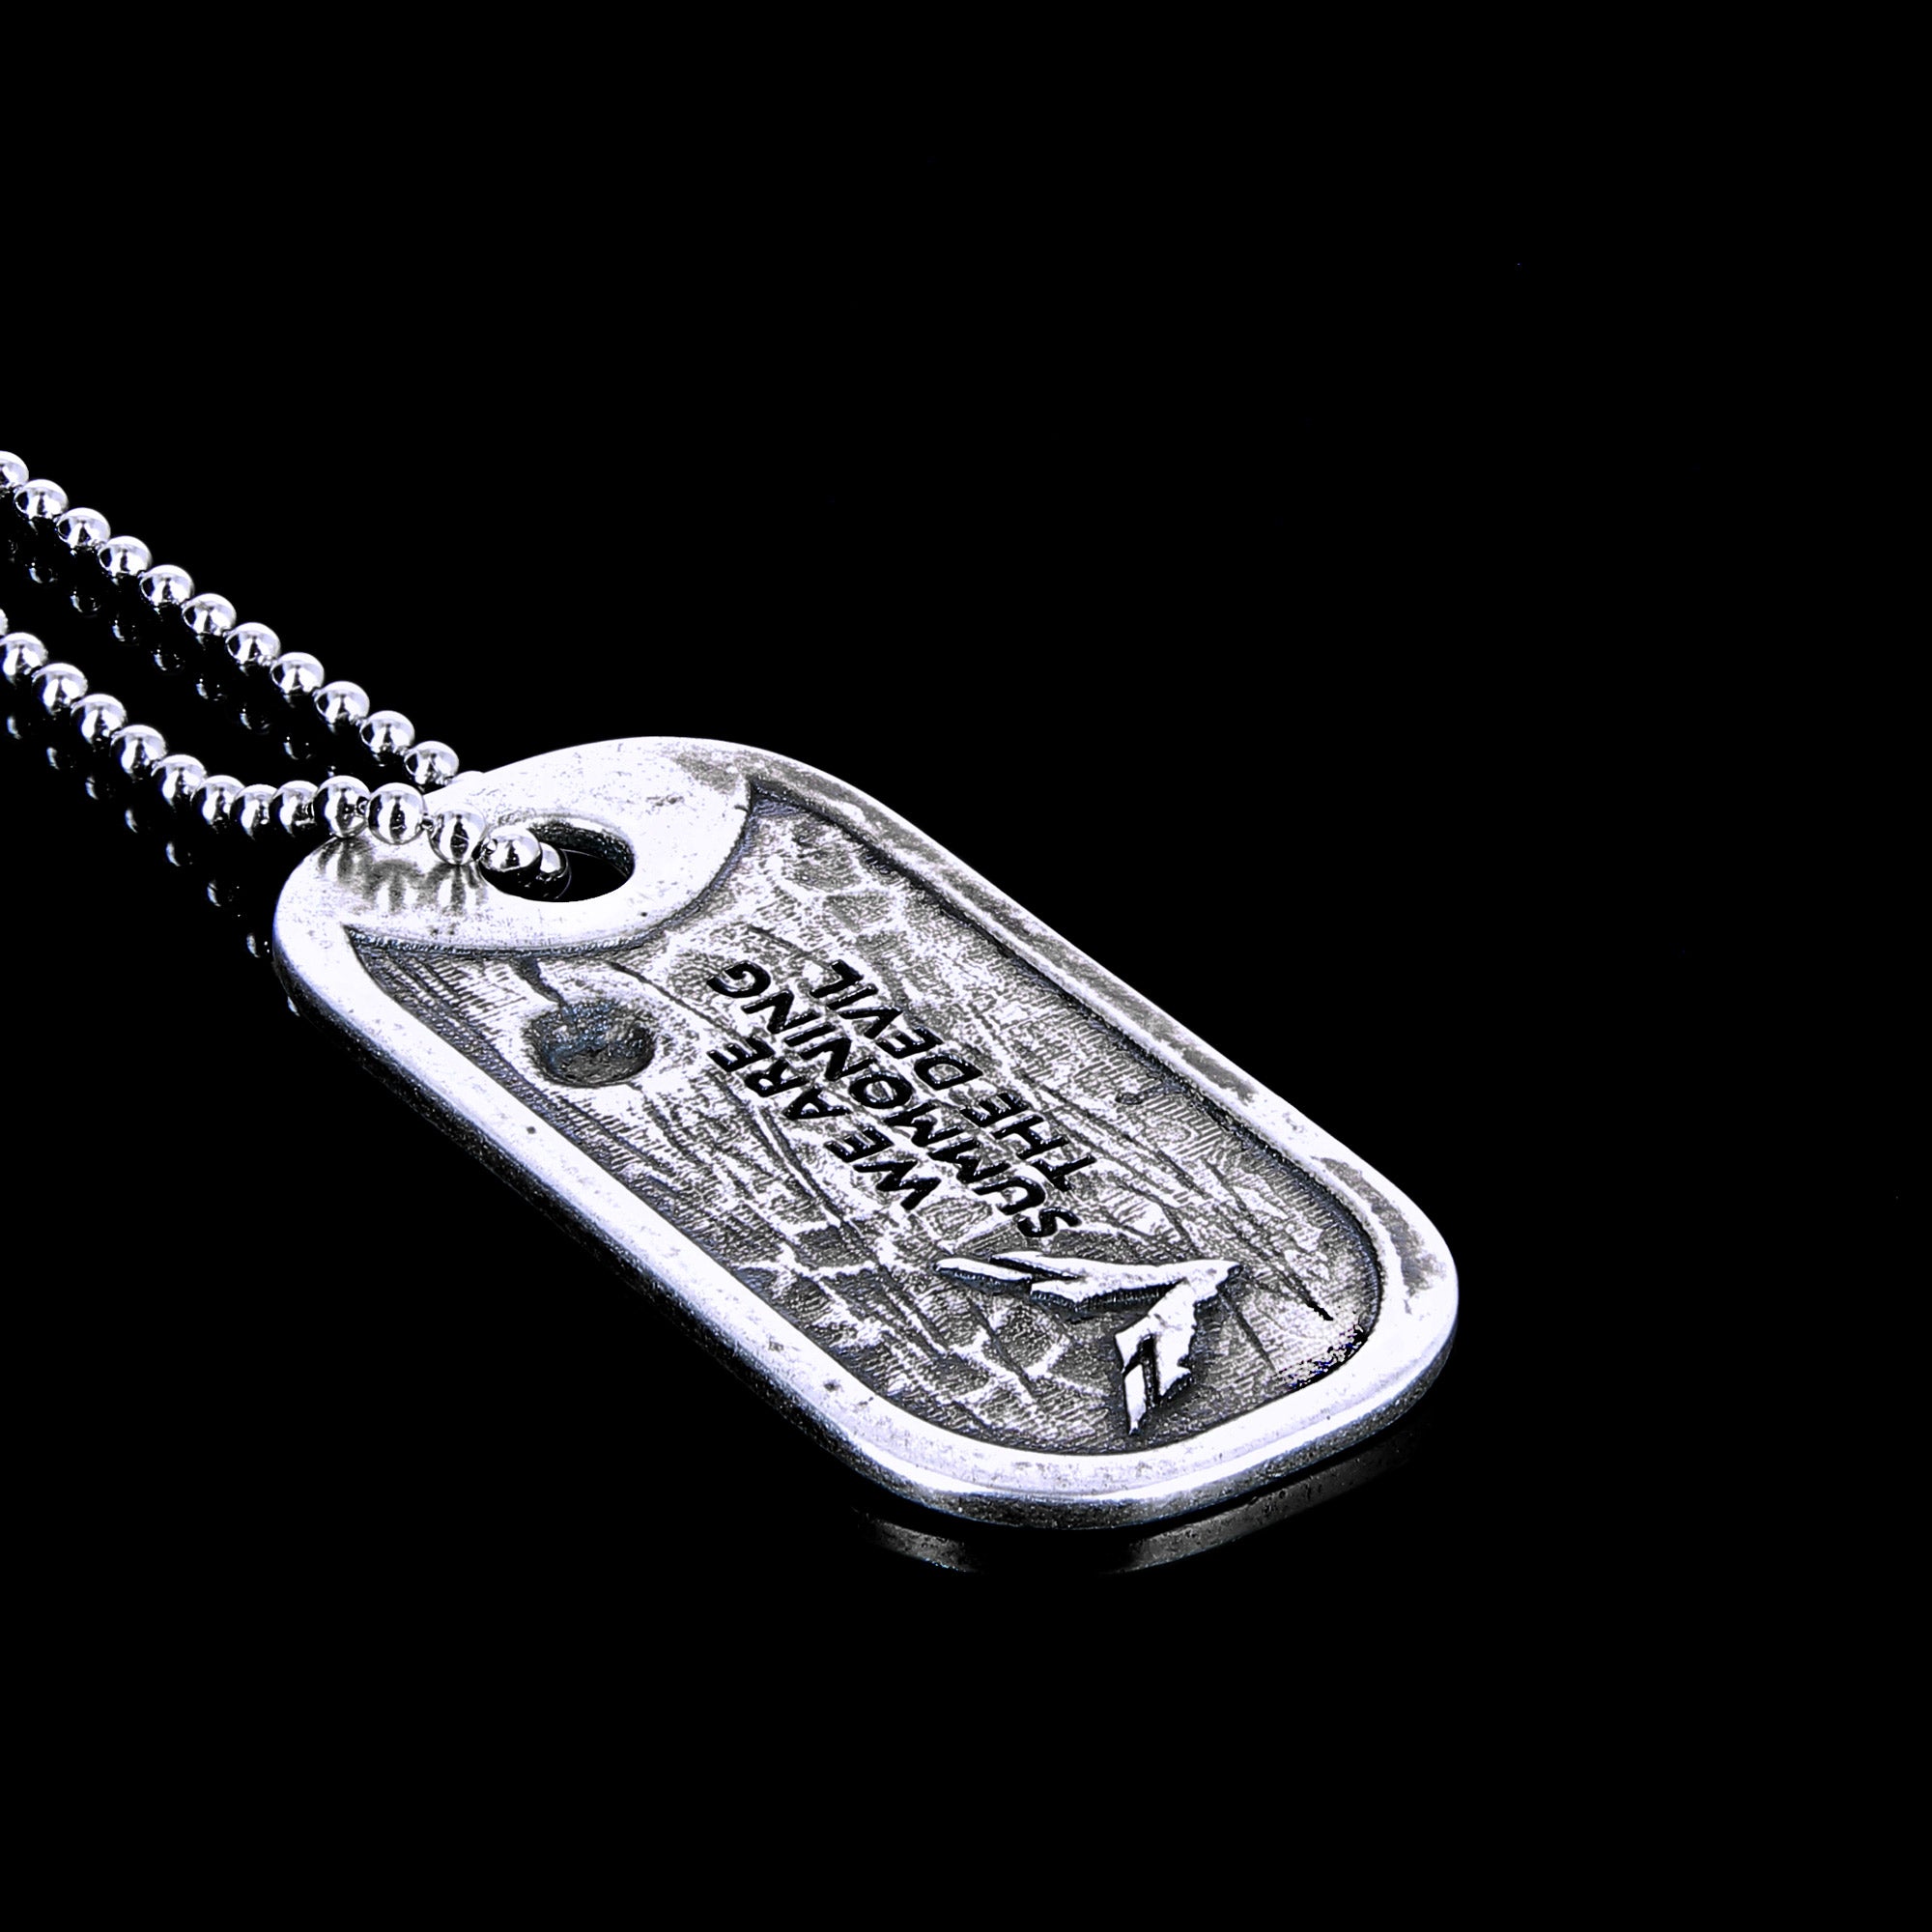 Wolves' Lucky Dog tag - Officially licensed Ghost Recon Breakpoint limited edition pendant